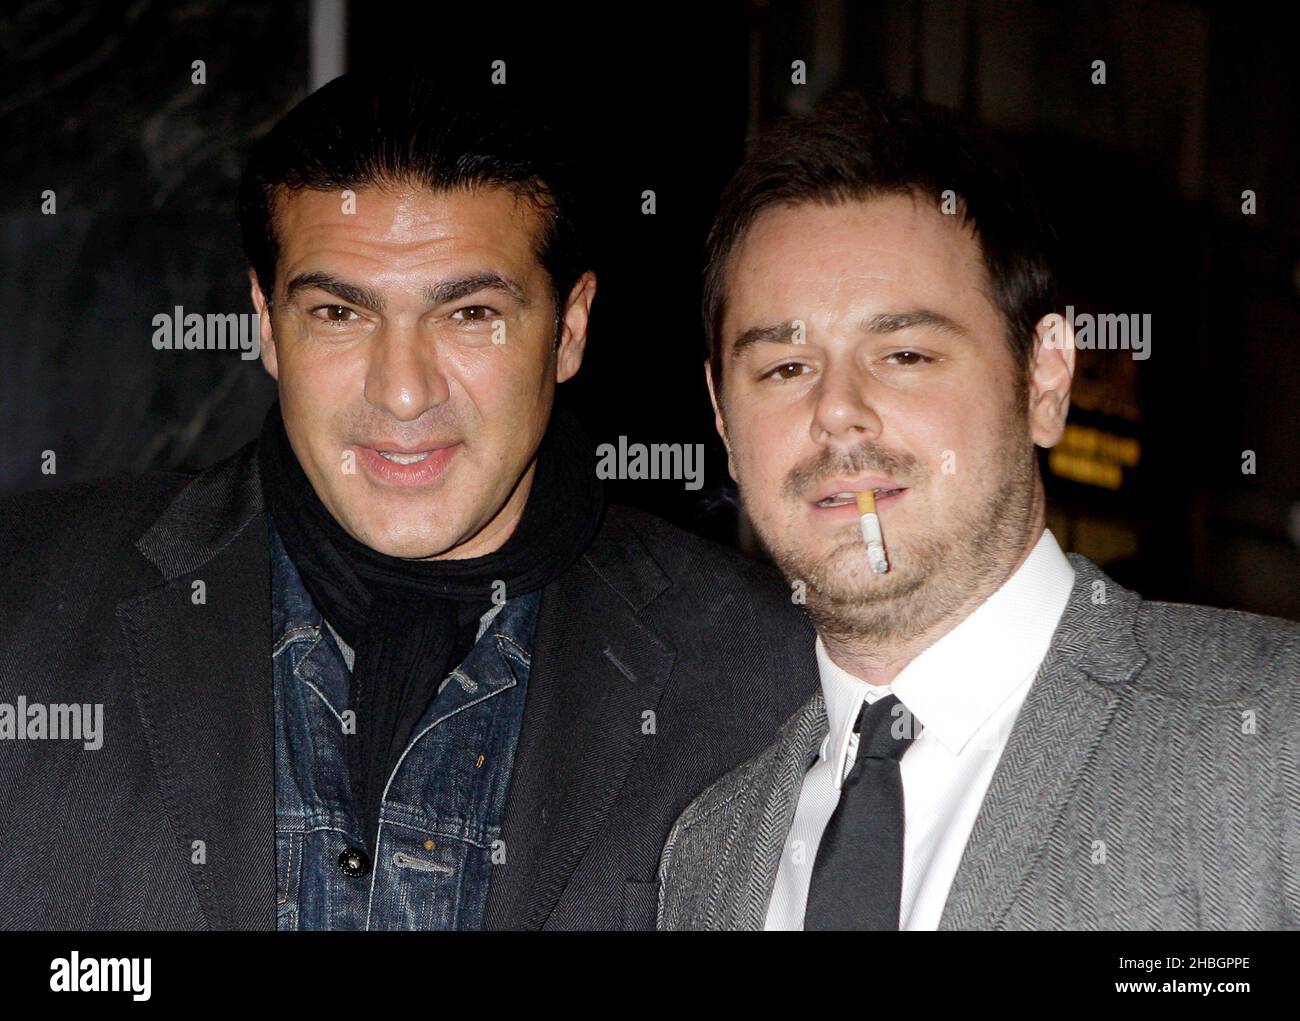 Tamer Hassan and Danny Dyer attending the world premiere of 'Deviation' at Odeon Cinema in Covent Garden, London. Stock Photo